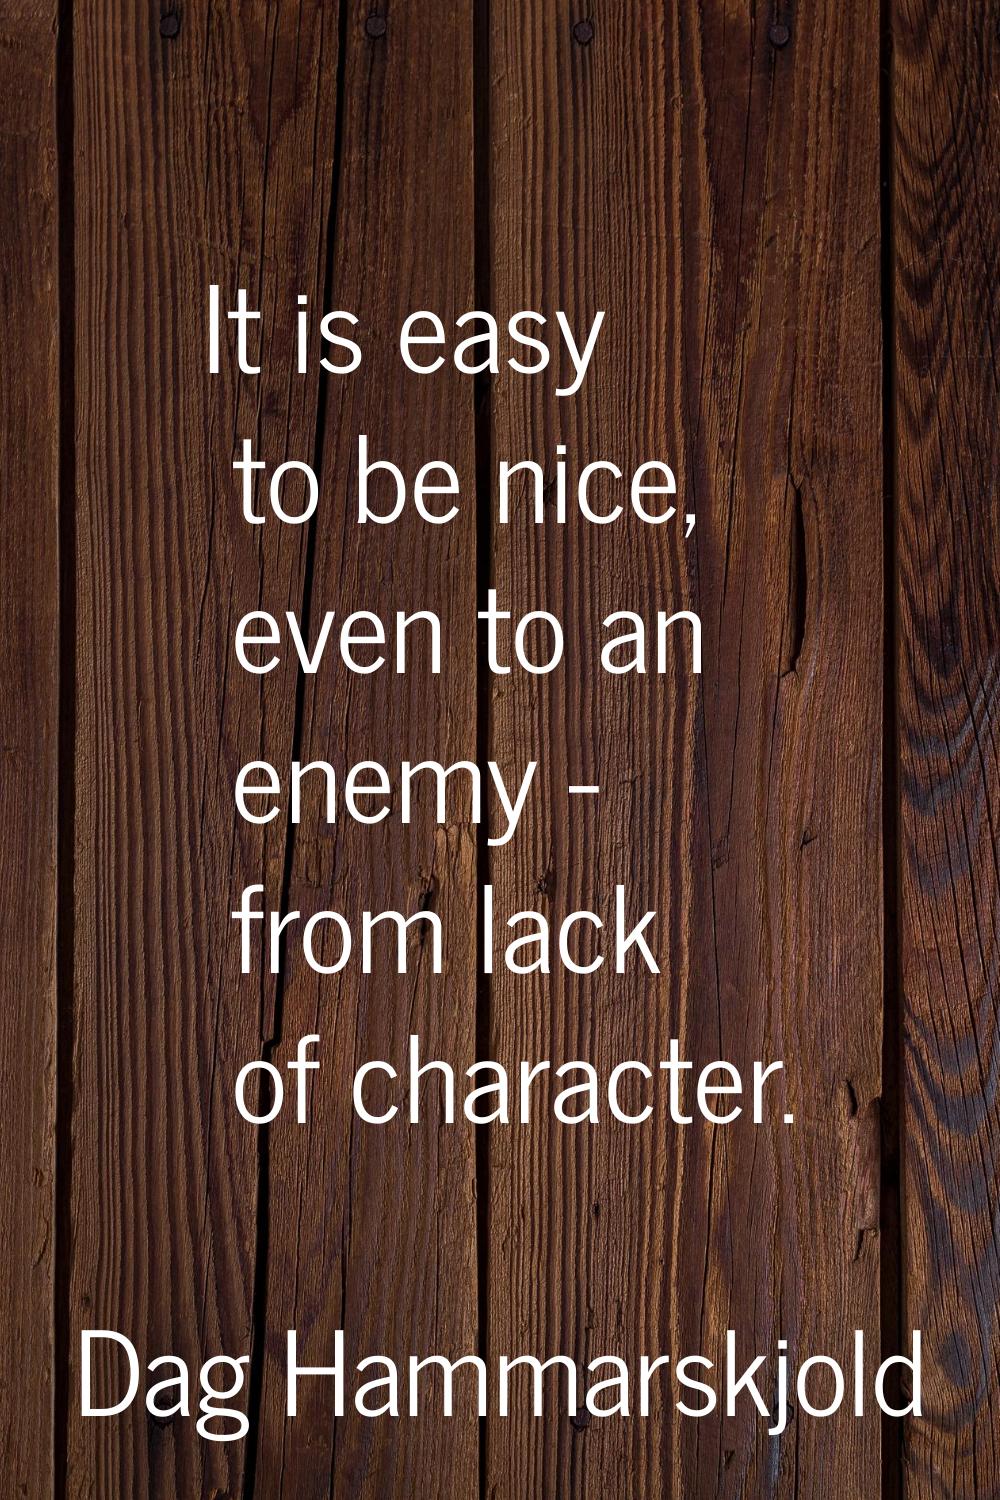 It is easy to be nice, even to an enemy - from lack of character.